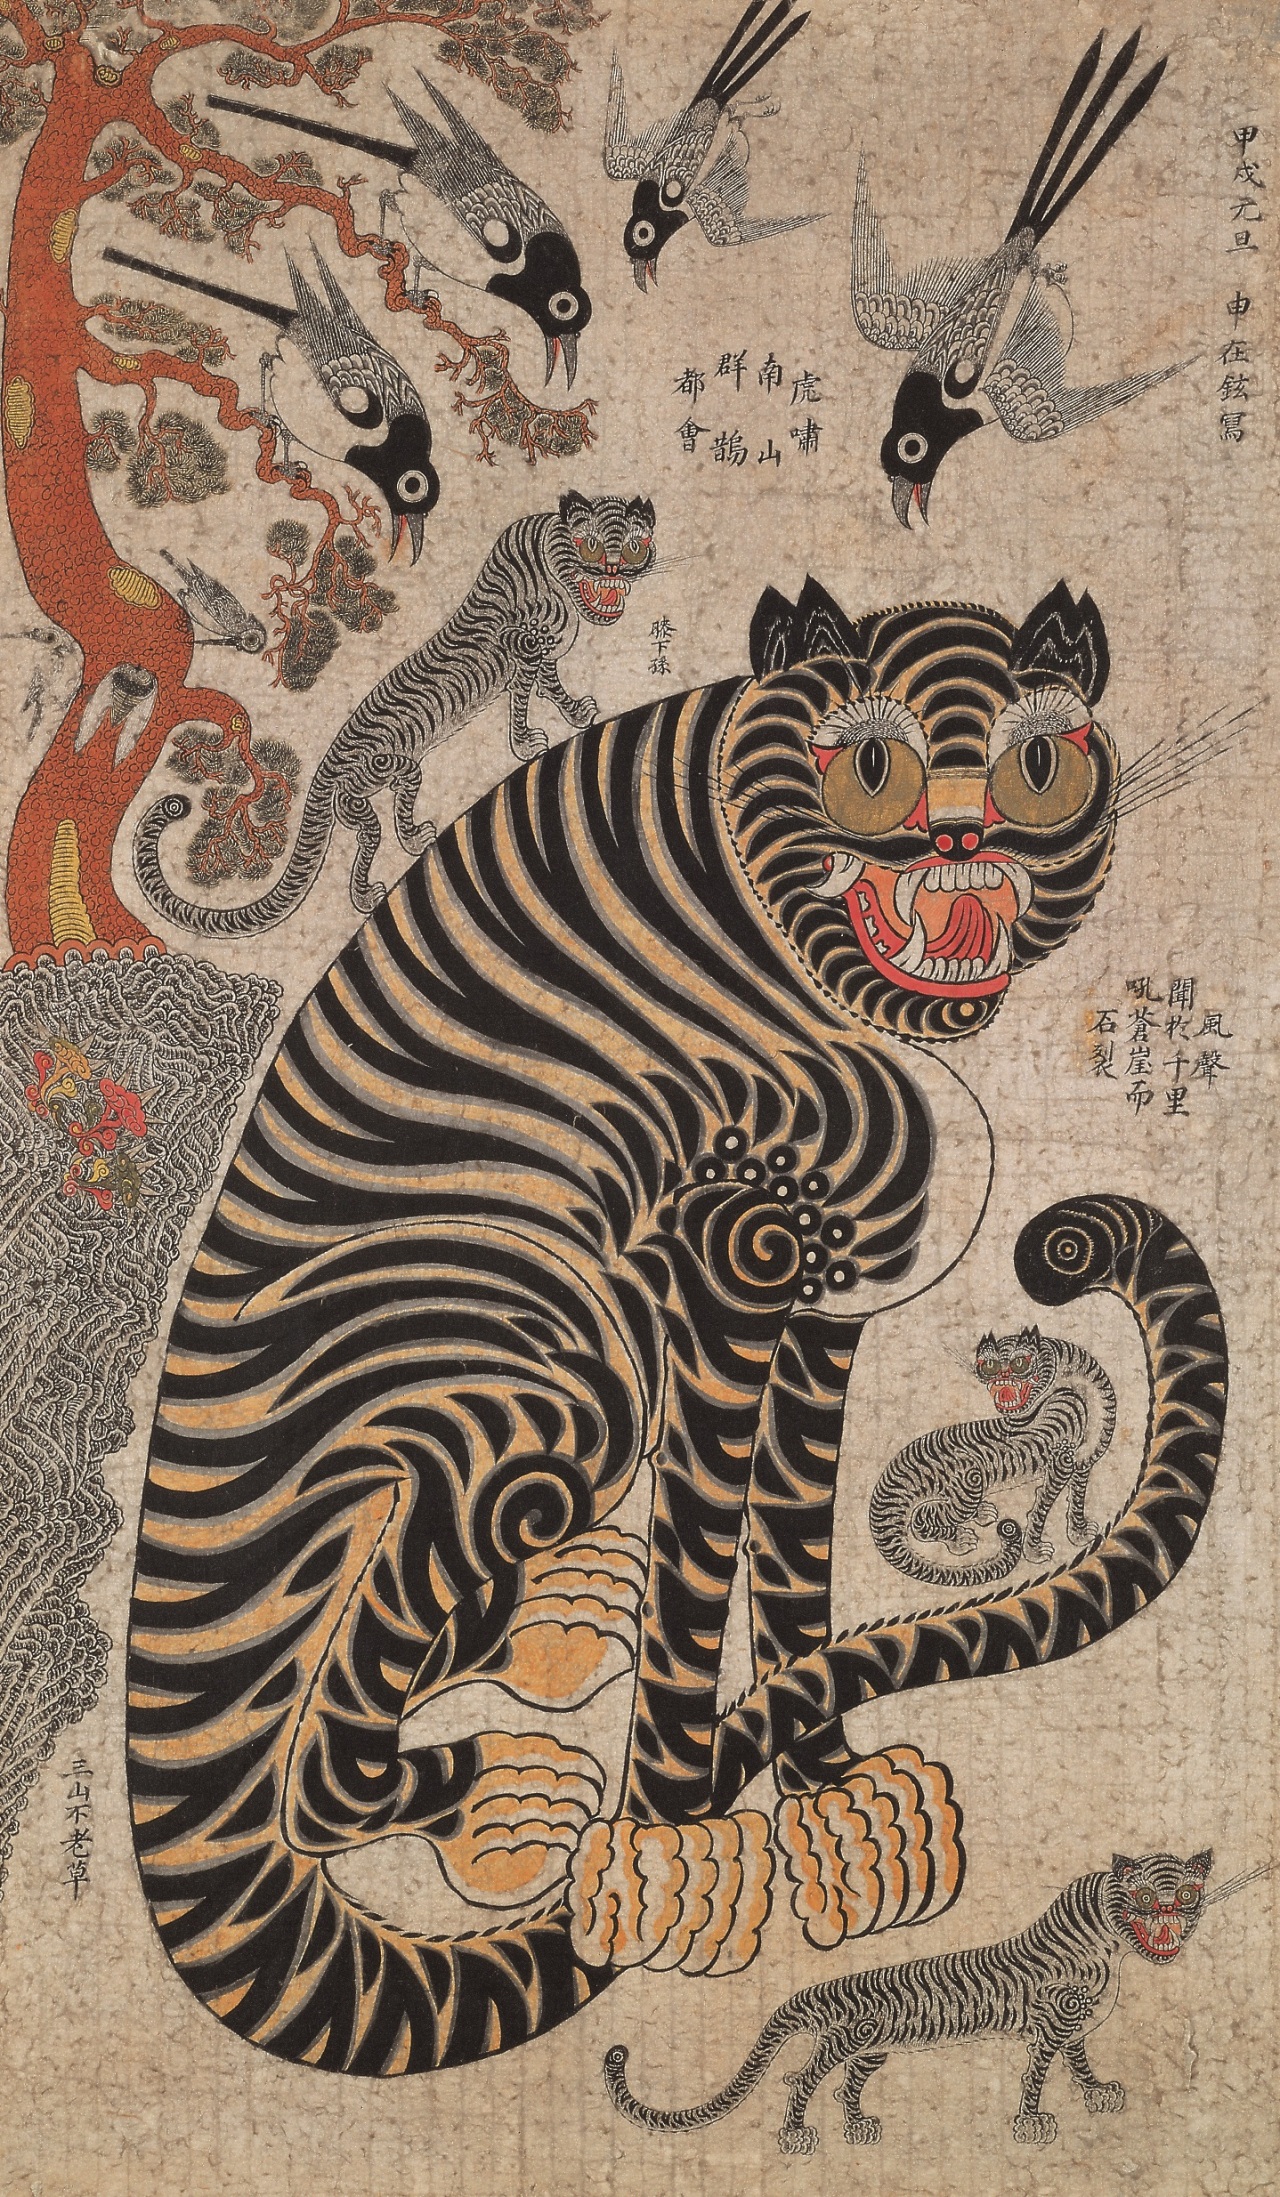 “Tiger and Magpie” by Shin Jae-hyun from the 19th century (Leeum Museum of Art)